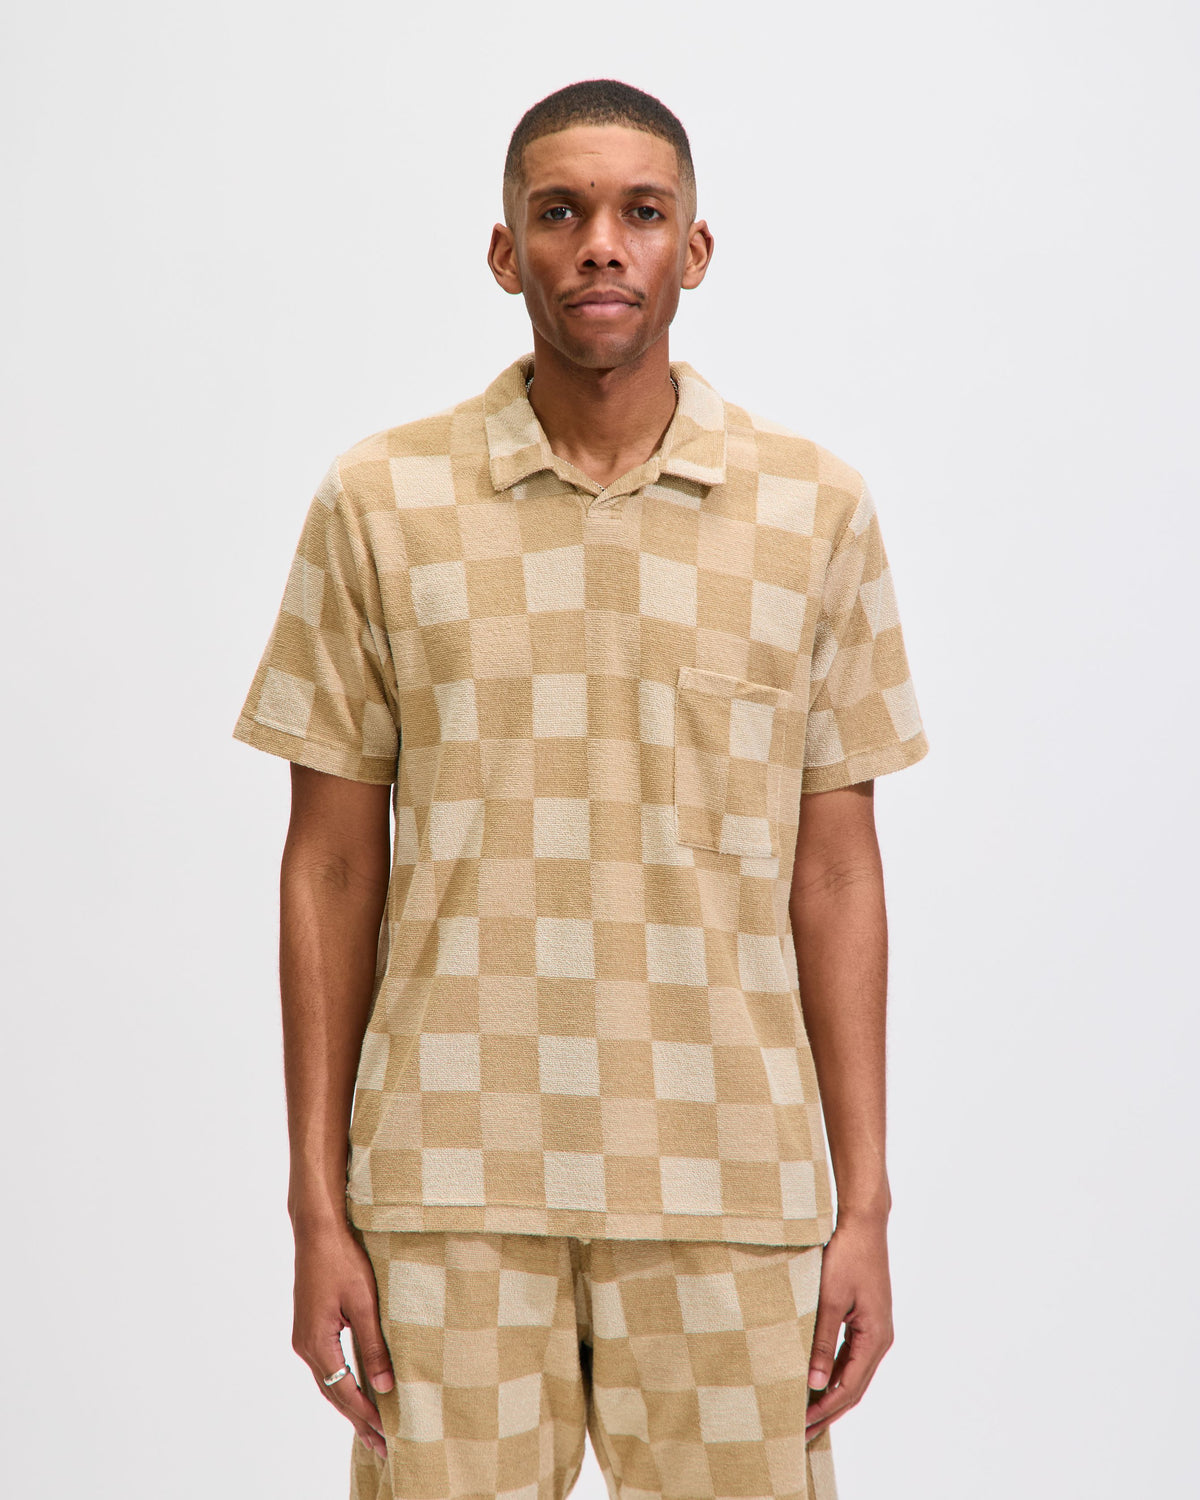 Vacation Polo In Sand Checkboard Towelling